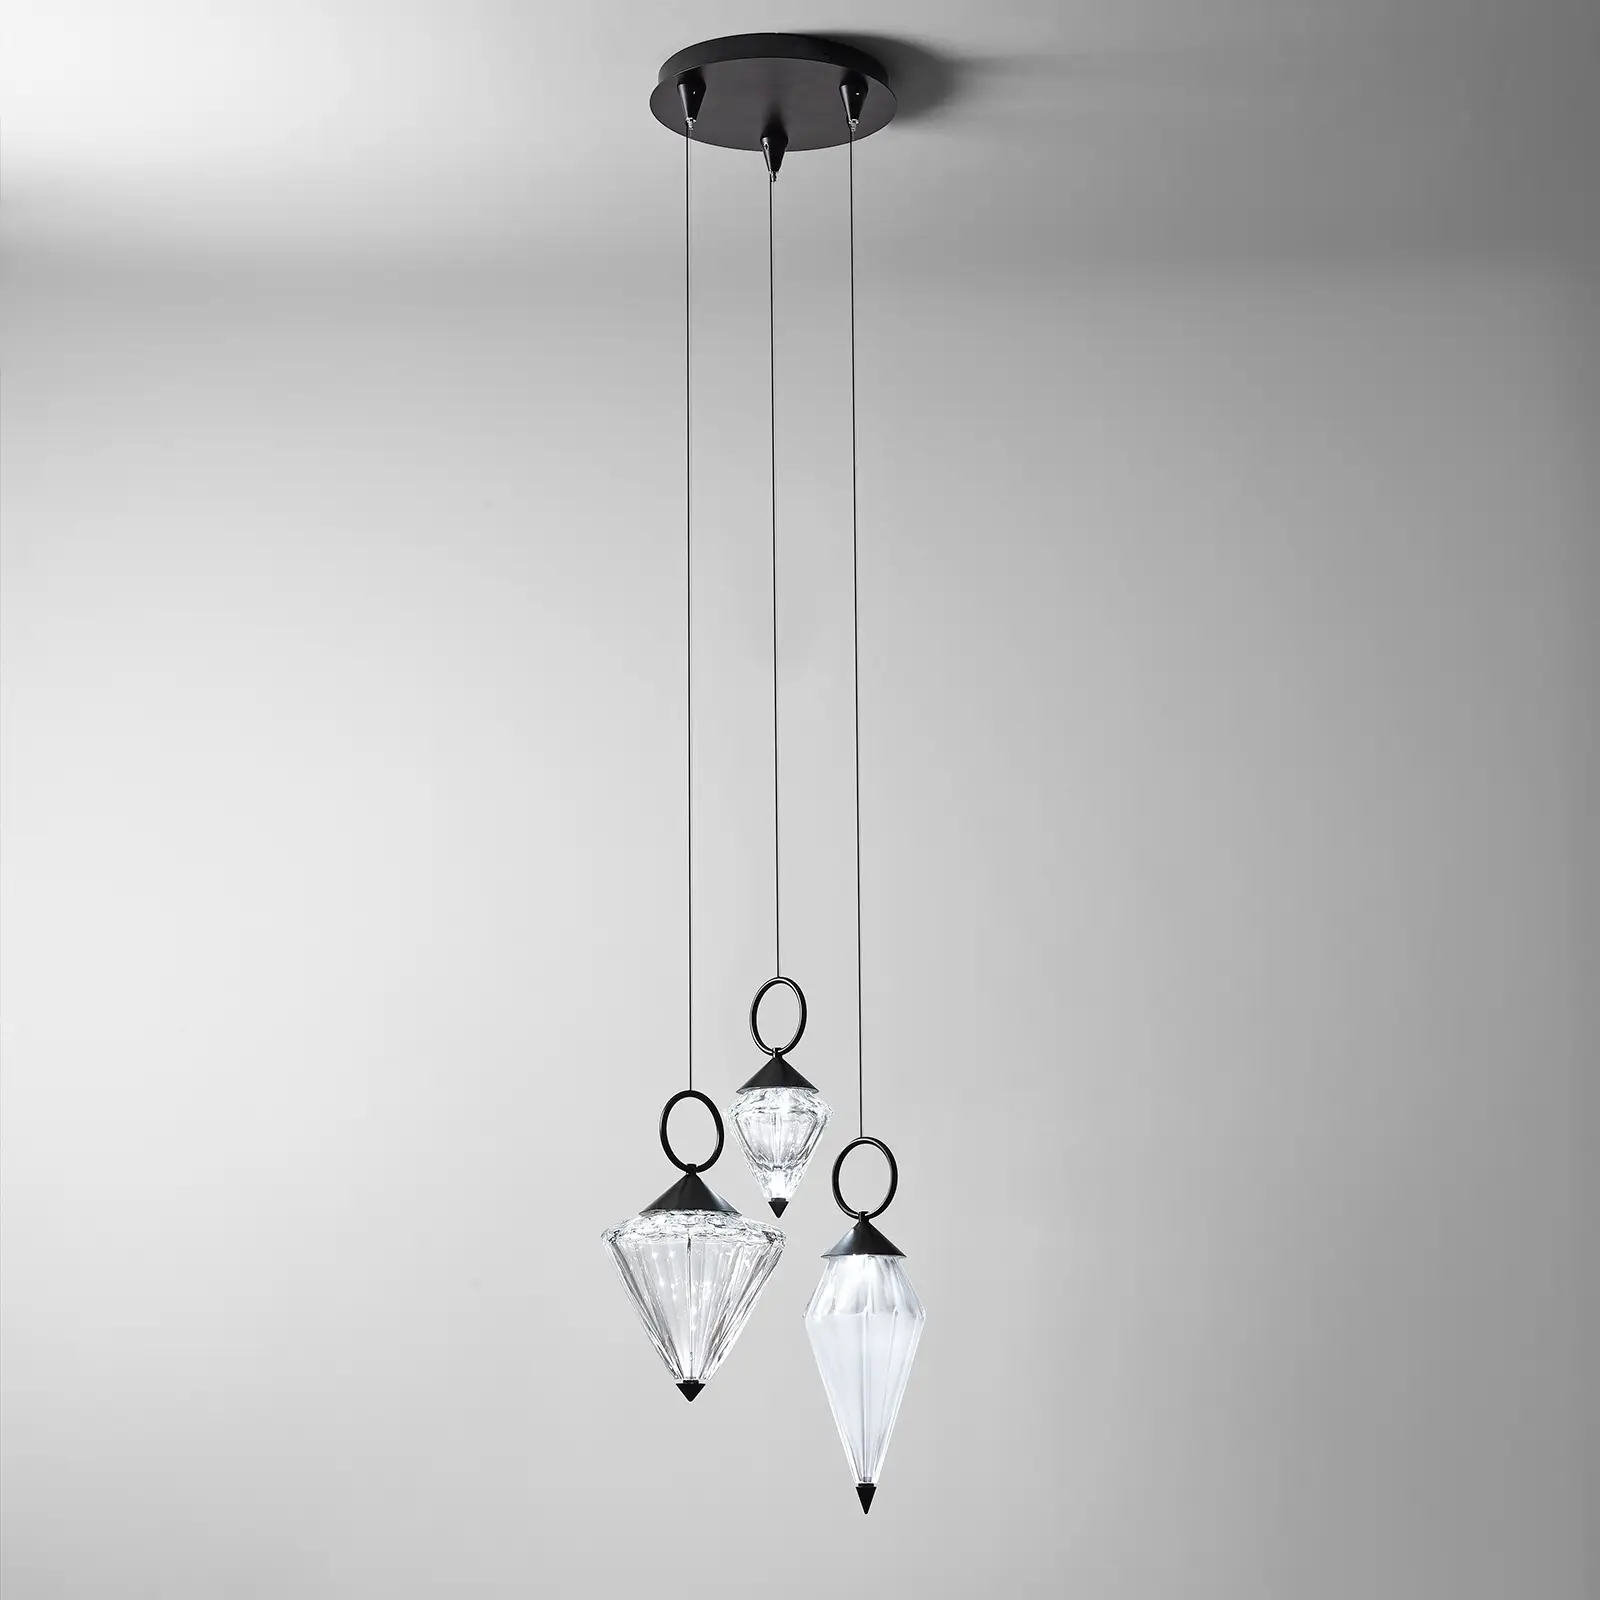 Hanging lamp DONNA by ITALAMP